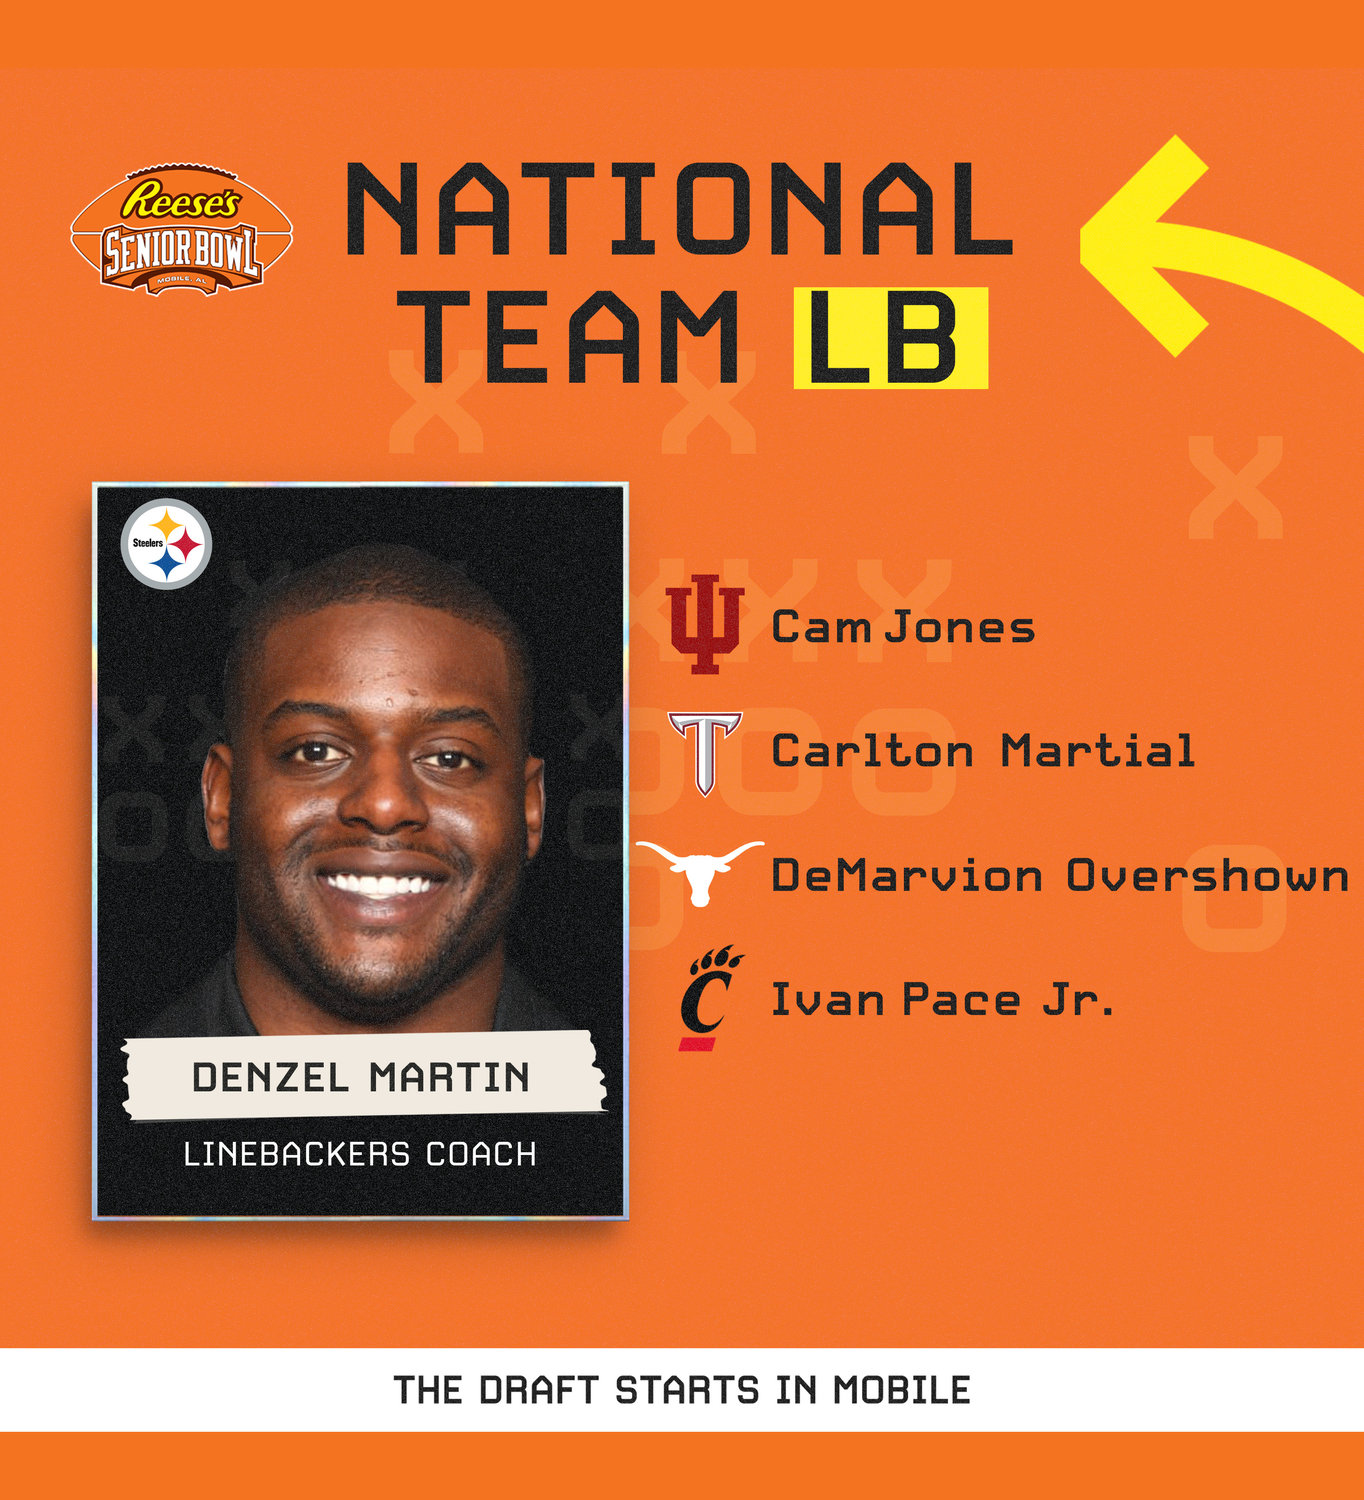 Denzel Martin from the Pittsburgh Steelers will serve as the National Team’s Inside Linebackers coach for the 74th annual Senior Bowl at South Alabama Saturday, Feb. 4. Among the athletes he’ll coach include Troy’s Carlton Martial, the all-time leading tackler for the FBS.